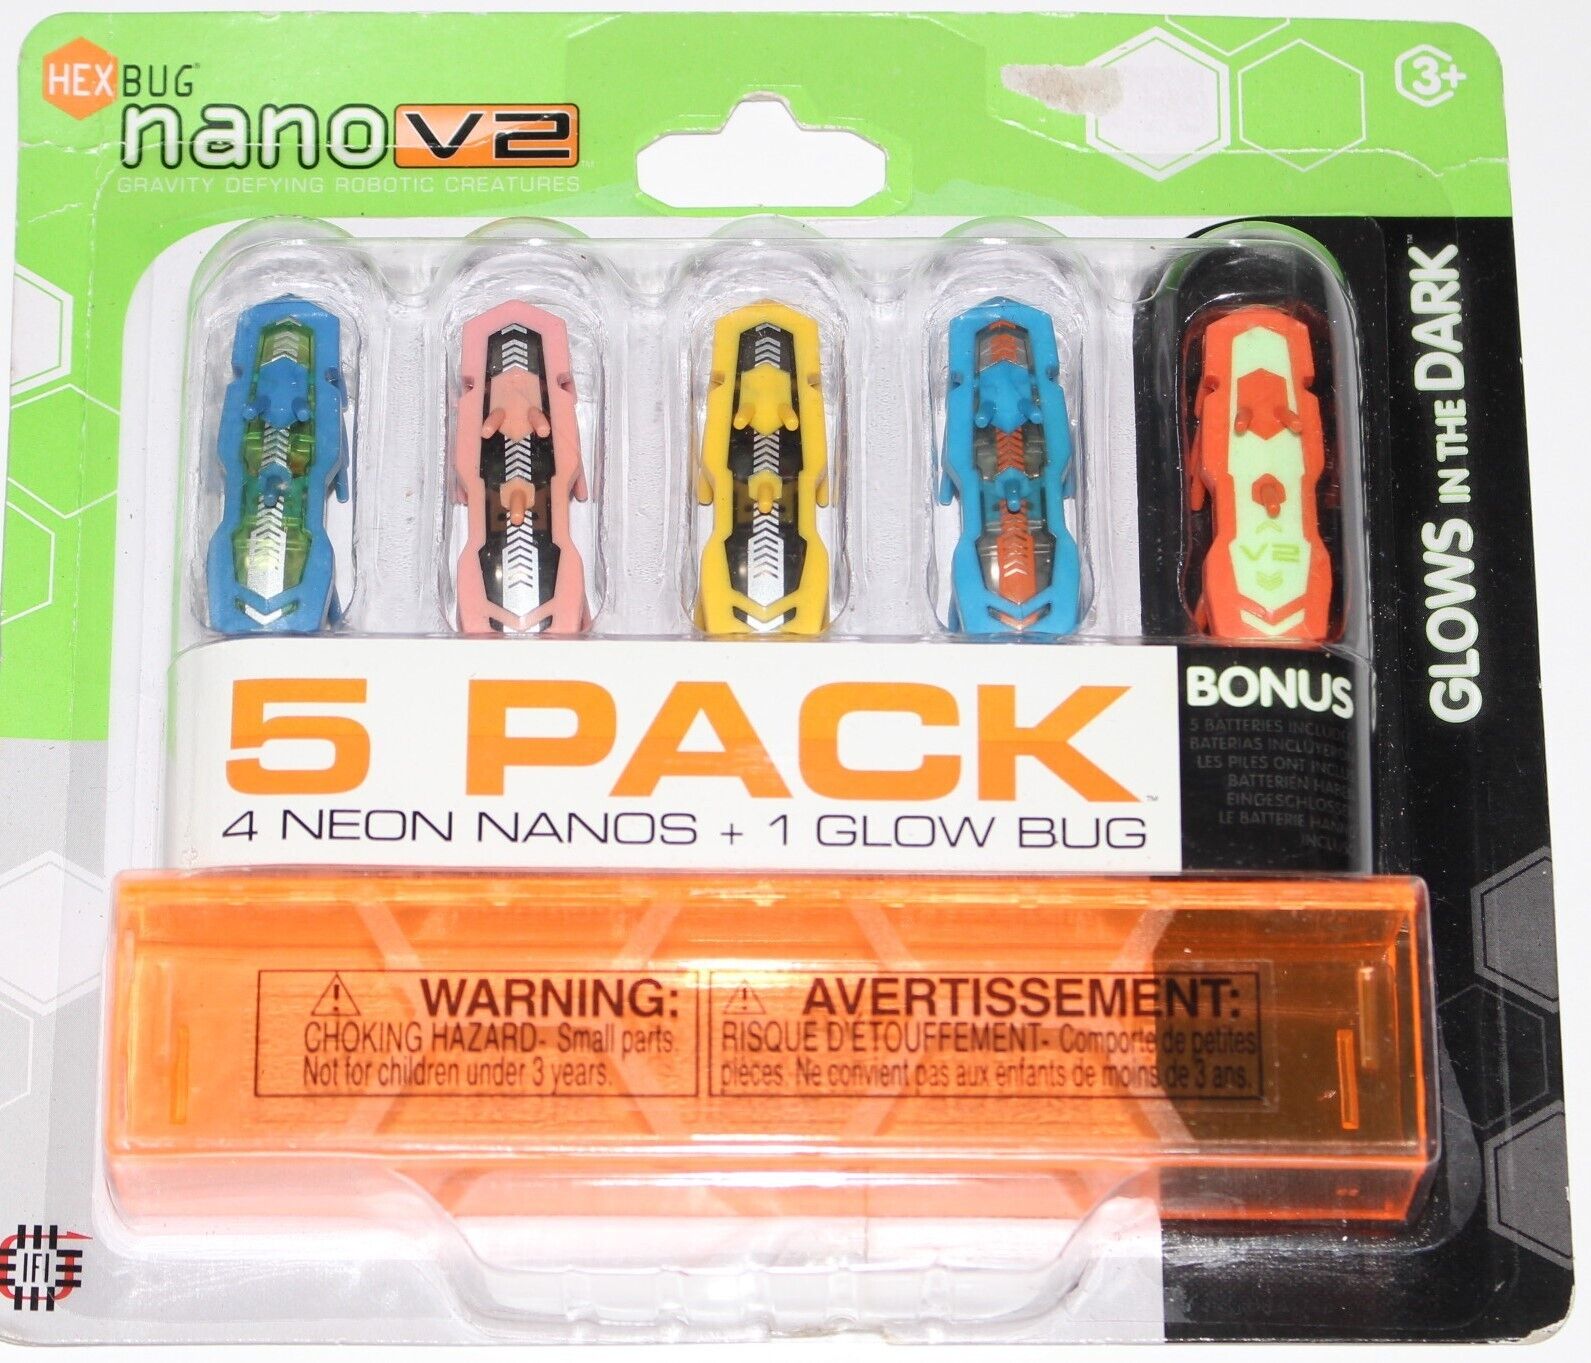 Lot Of 5 Hexbug Nano Bugs Toys In Package Glows In The Dark As Is